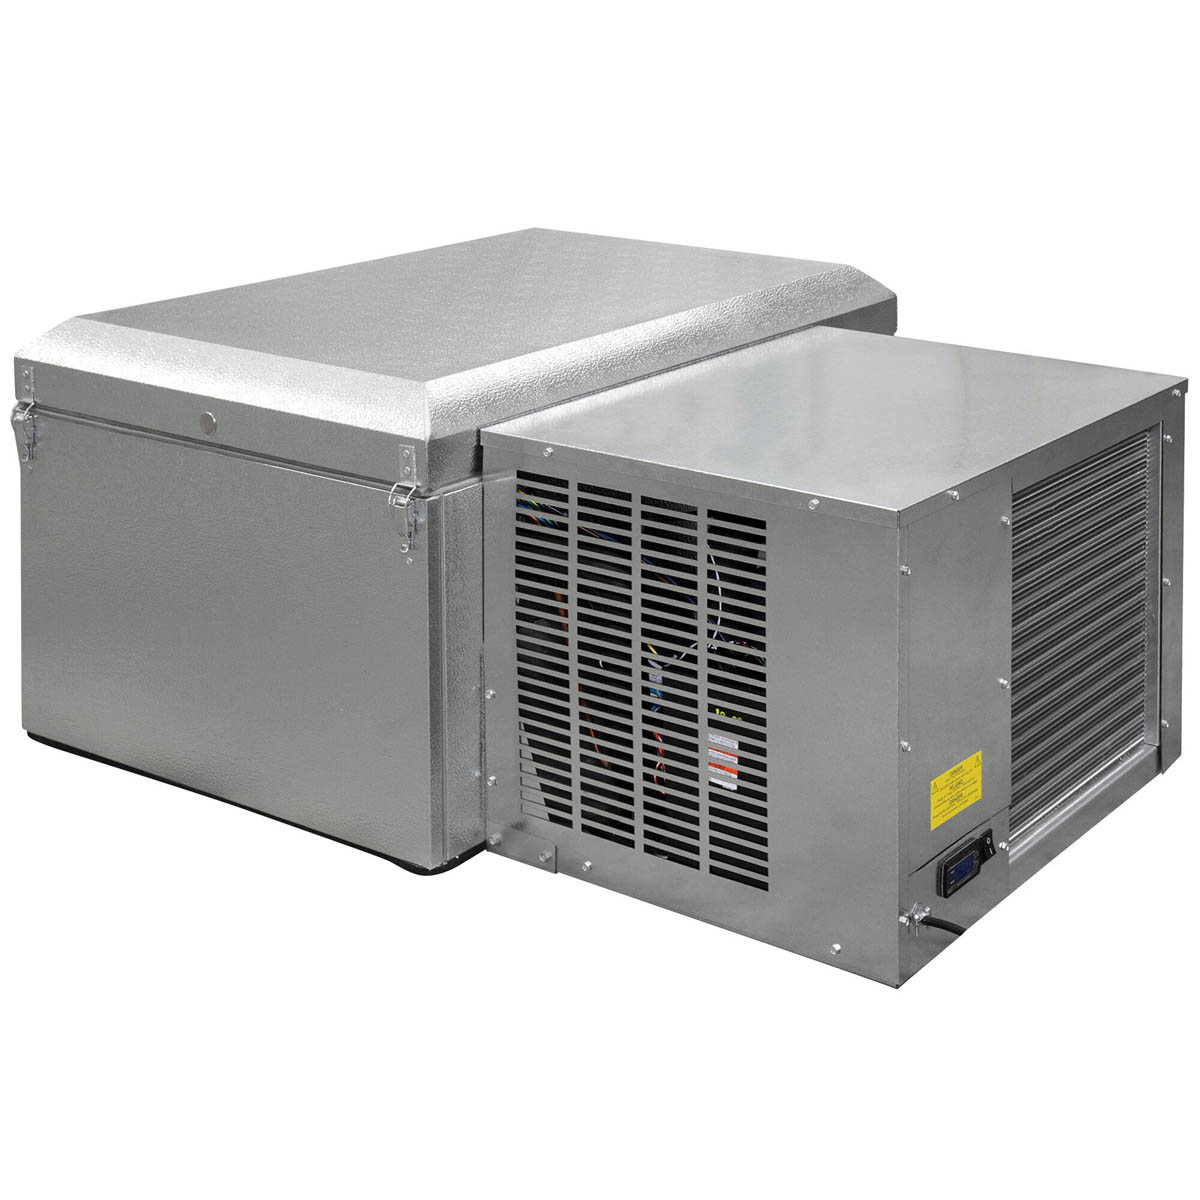 Nor-Lake CPB075JC-E-4-EV 59“ Self-Contained Refrigeration System